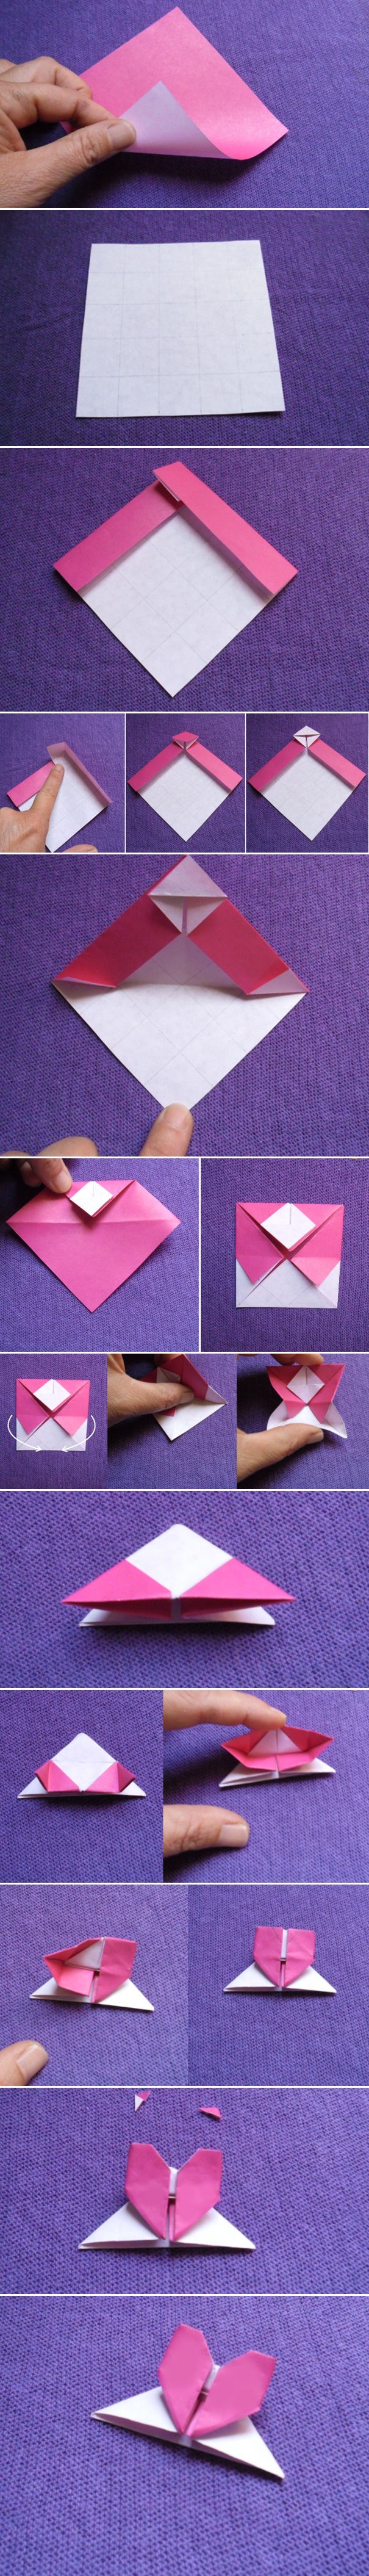 homemade valentines day gifts her origami paper heart tutorial